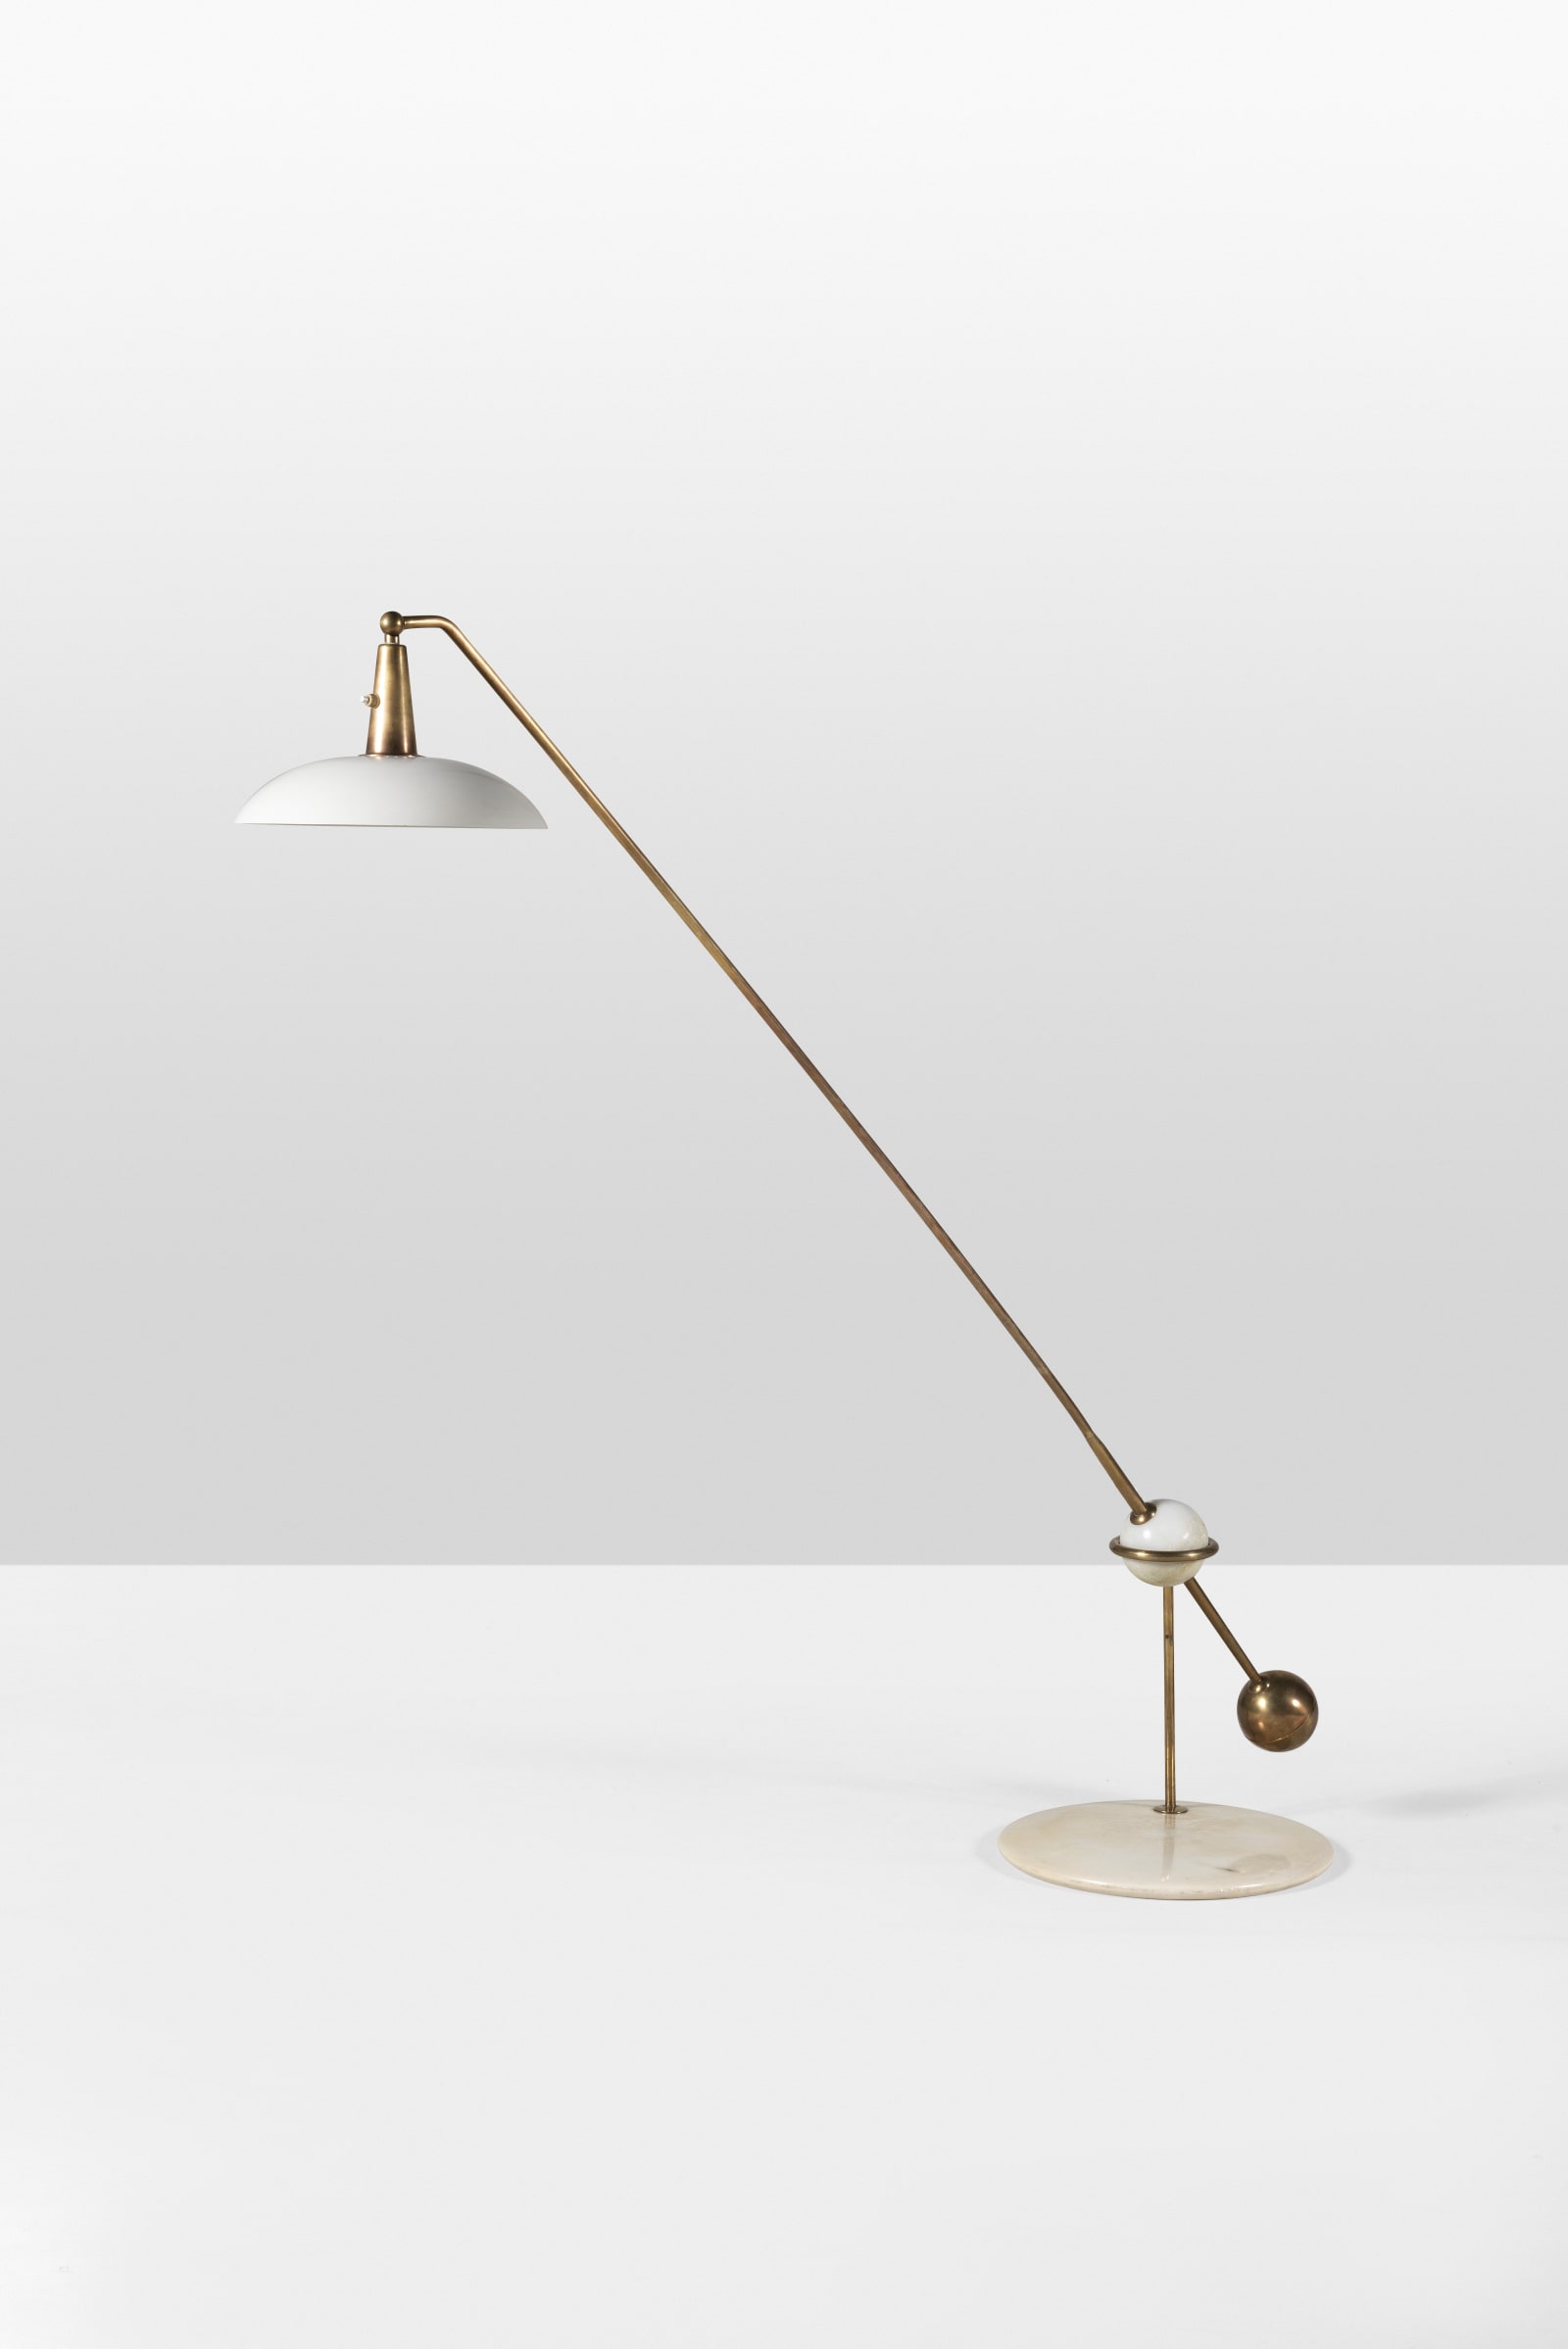 Competition: win a Tolomeo desk lamp by Artemide